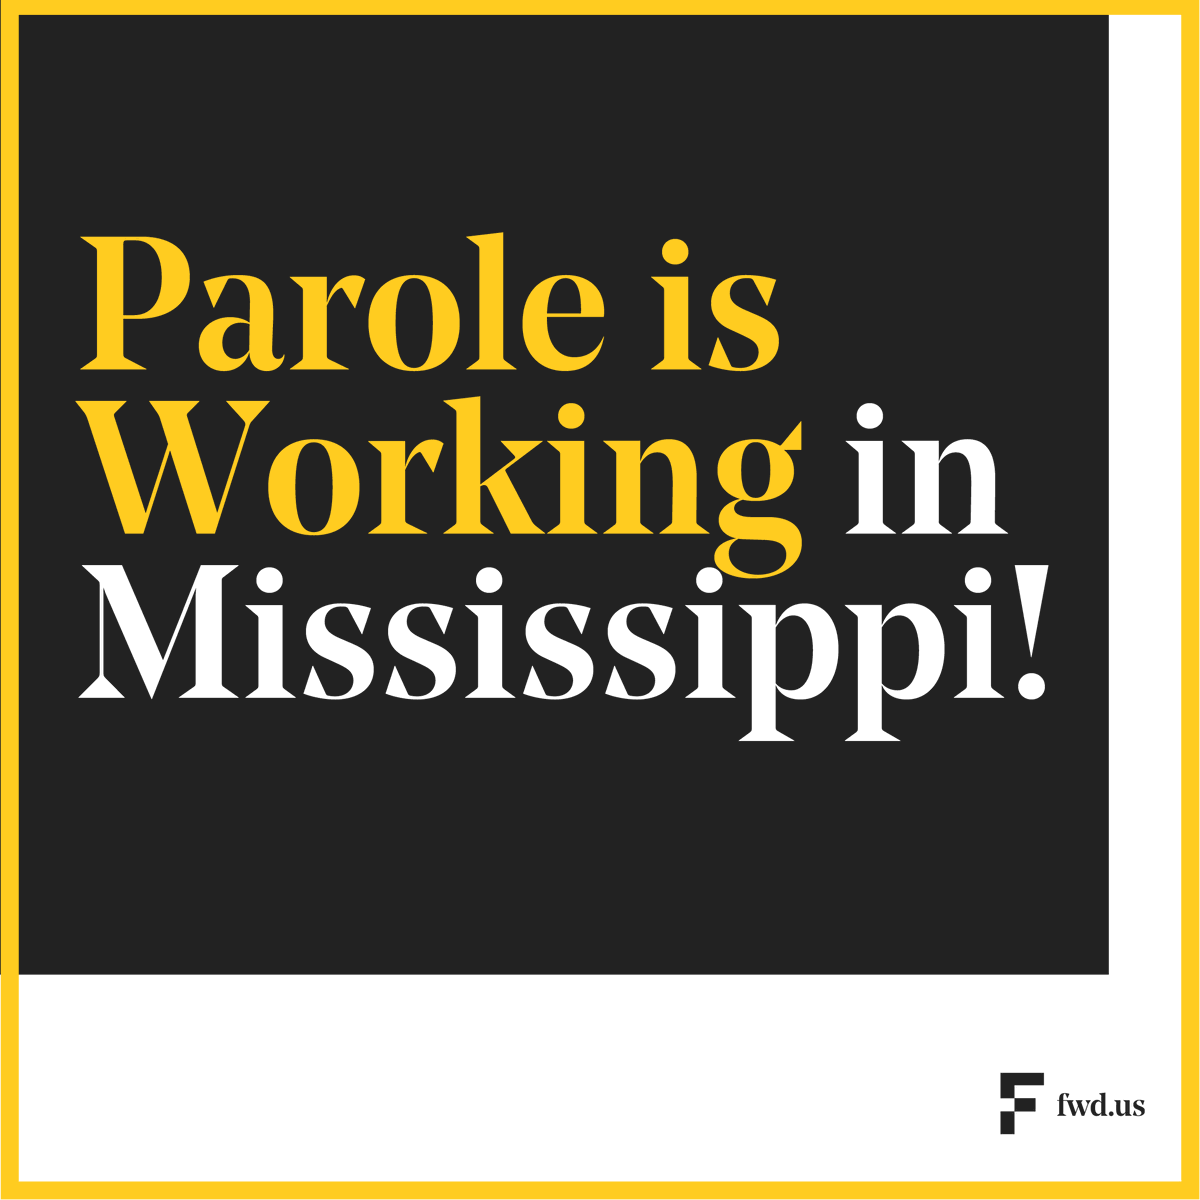 “Parole has proven time and time again to be a critical tool for safely reuniting people with their families, strengthening the state’s workforce, and reducing recidivism.” - @Alesha_Camille, Mississippi State Director. magnoliatribune.com/2024/05/07/par…